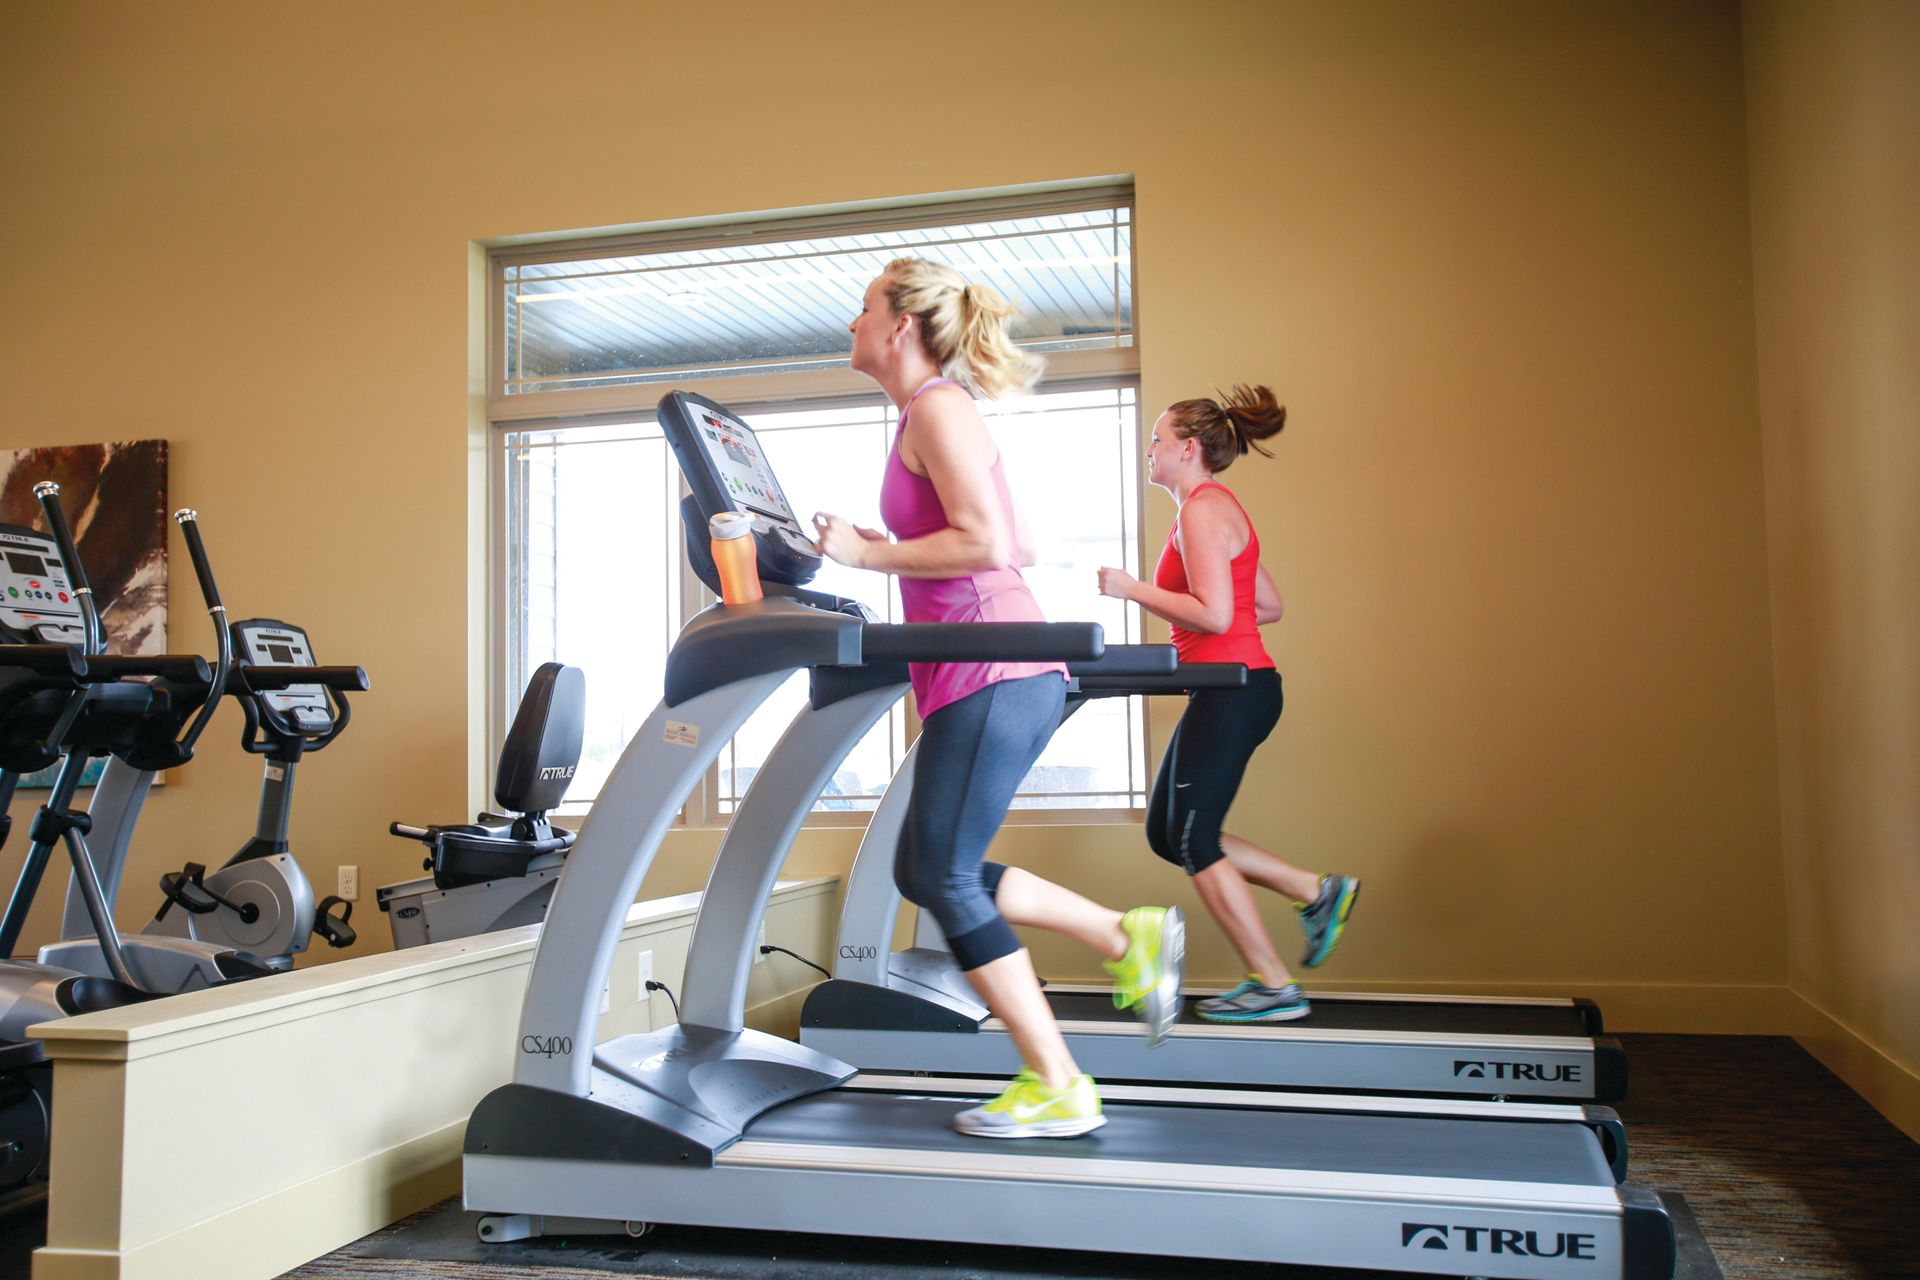 Two women are running on treadmills in a gym.